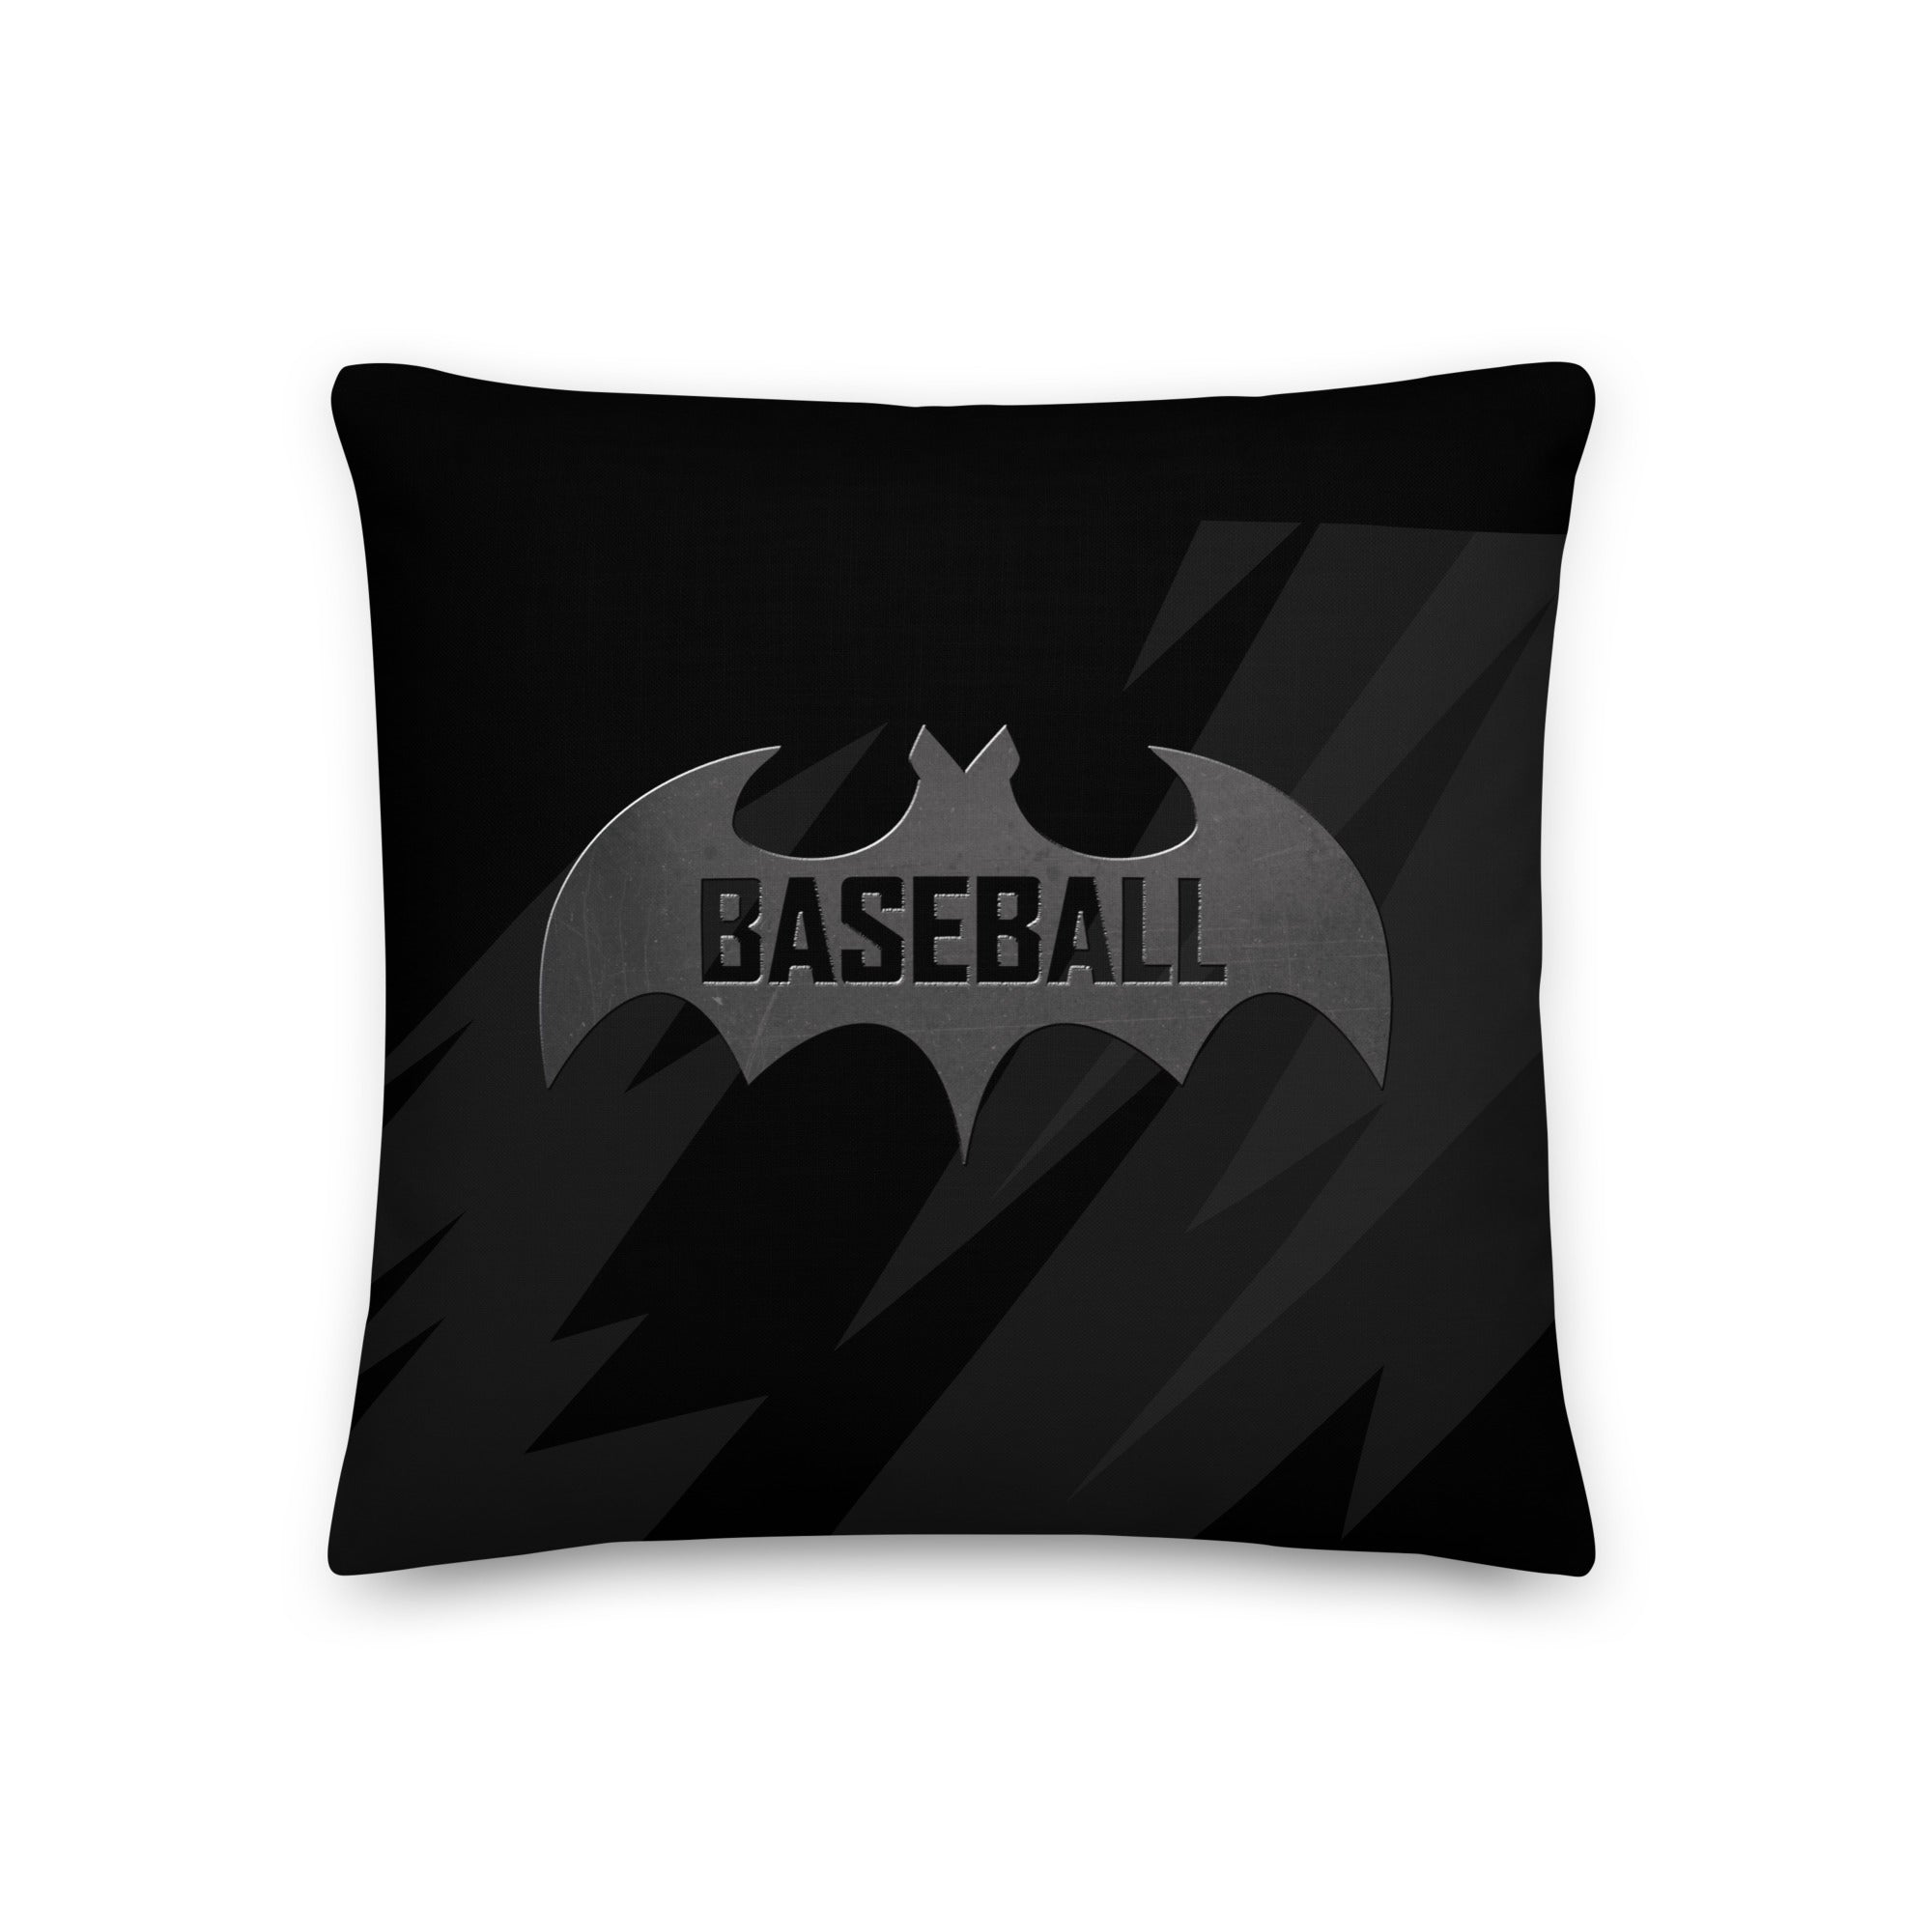 Black pillow with a Bat and baseball